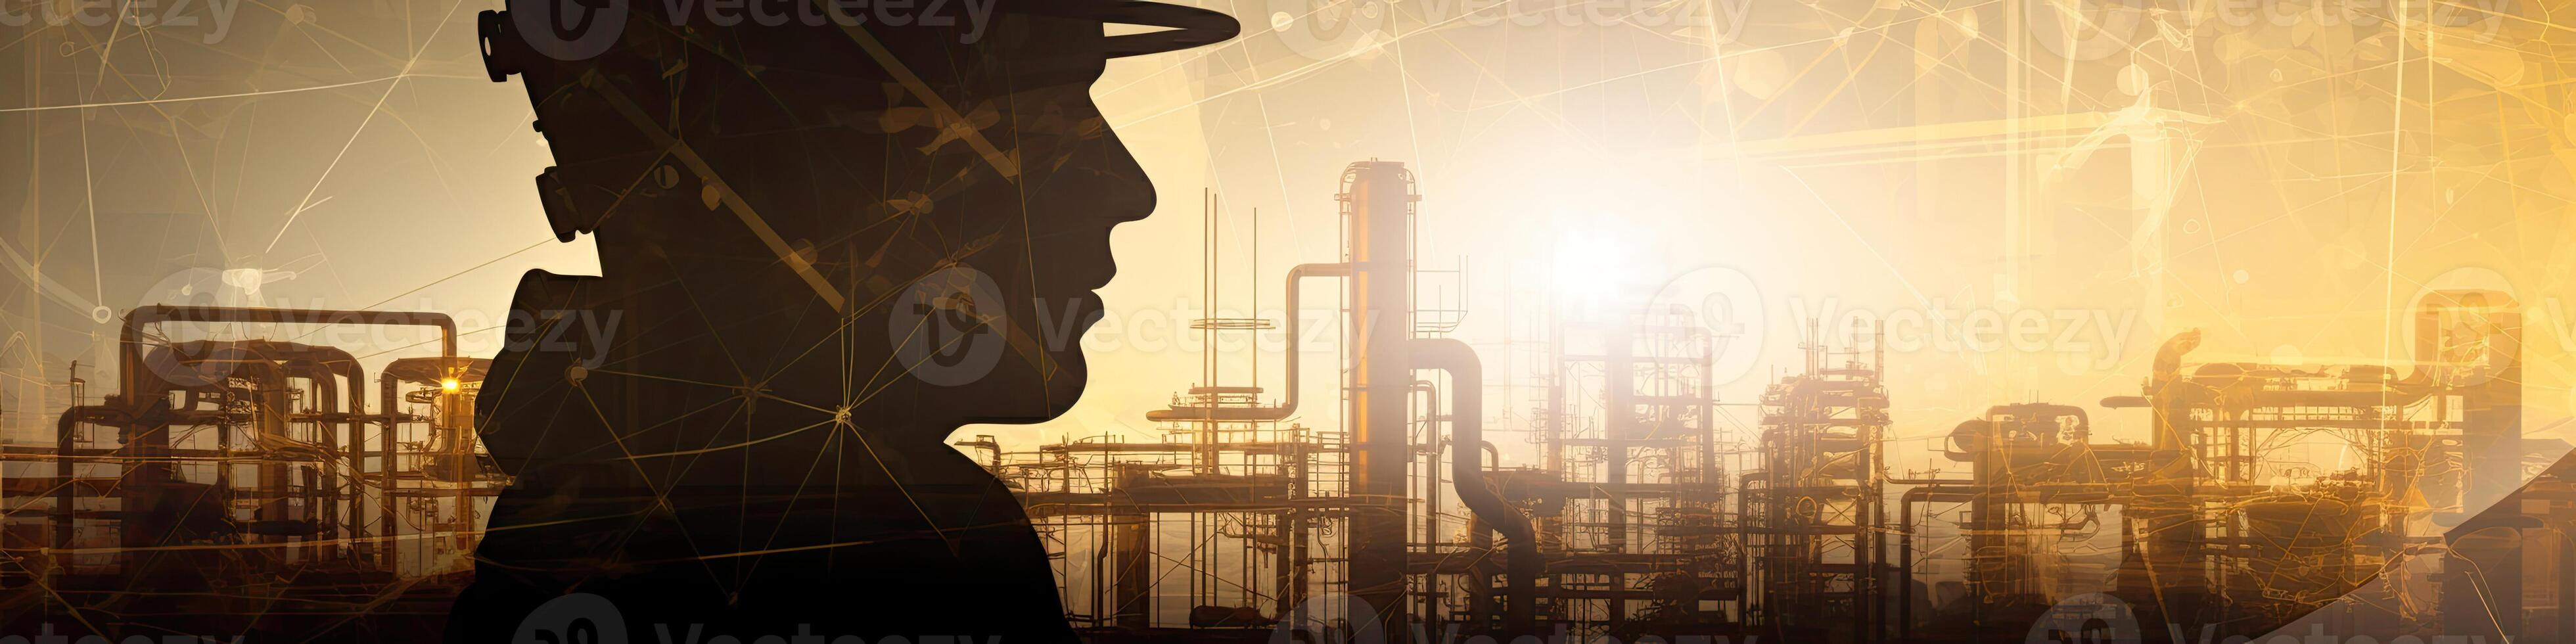 Silhouette of industrial worker with oil refinery plant as background. photo